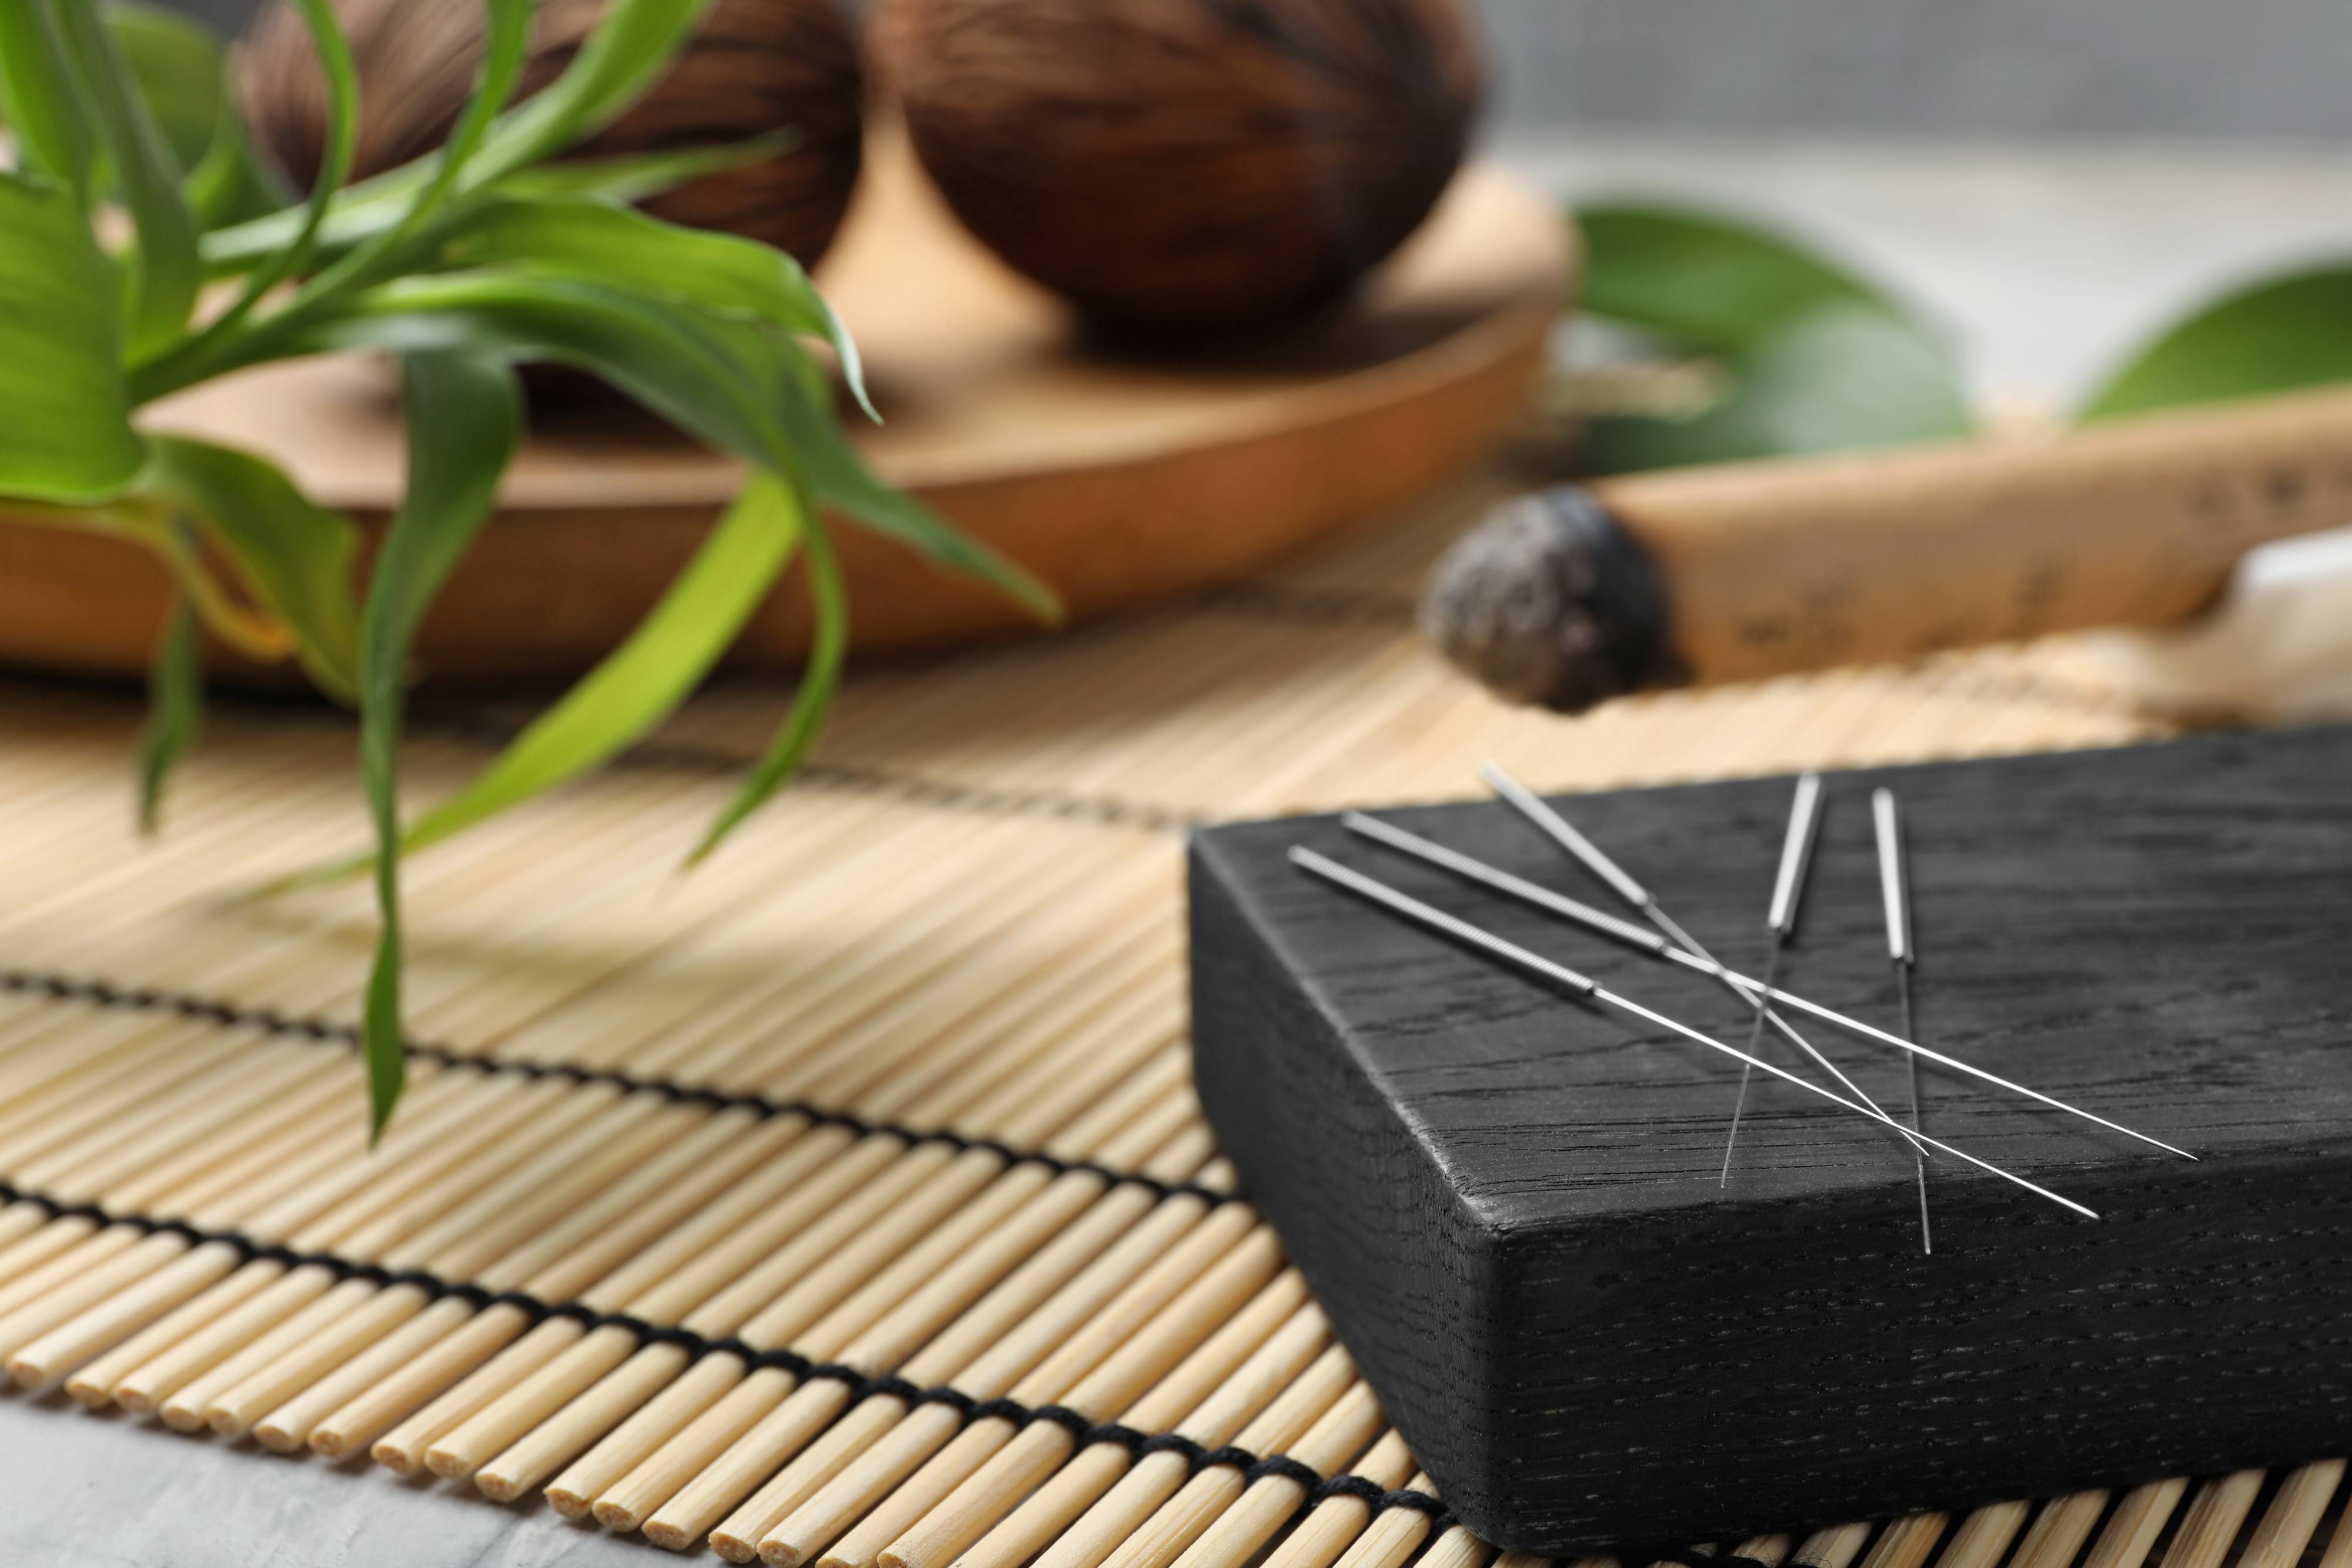 5 Conditions That Can Be Treated with Acupuncture